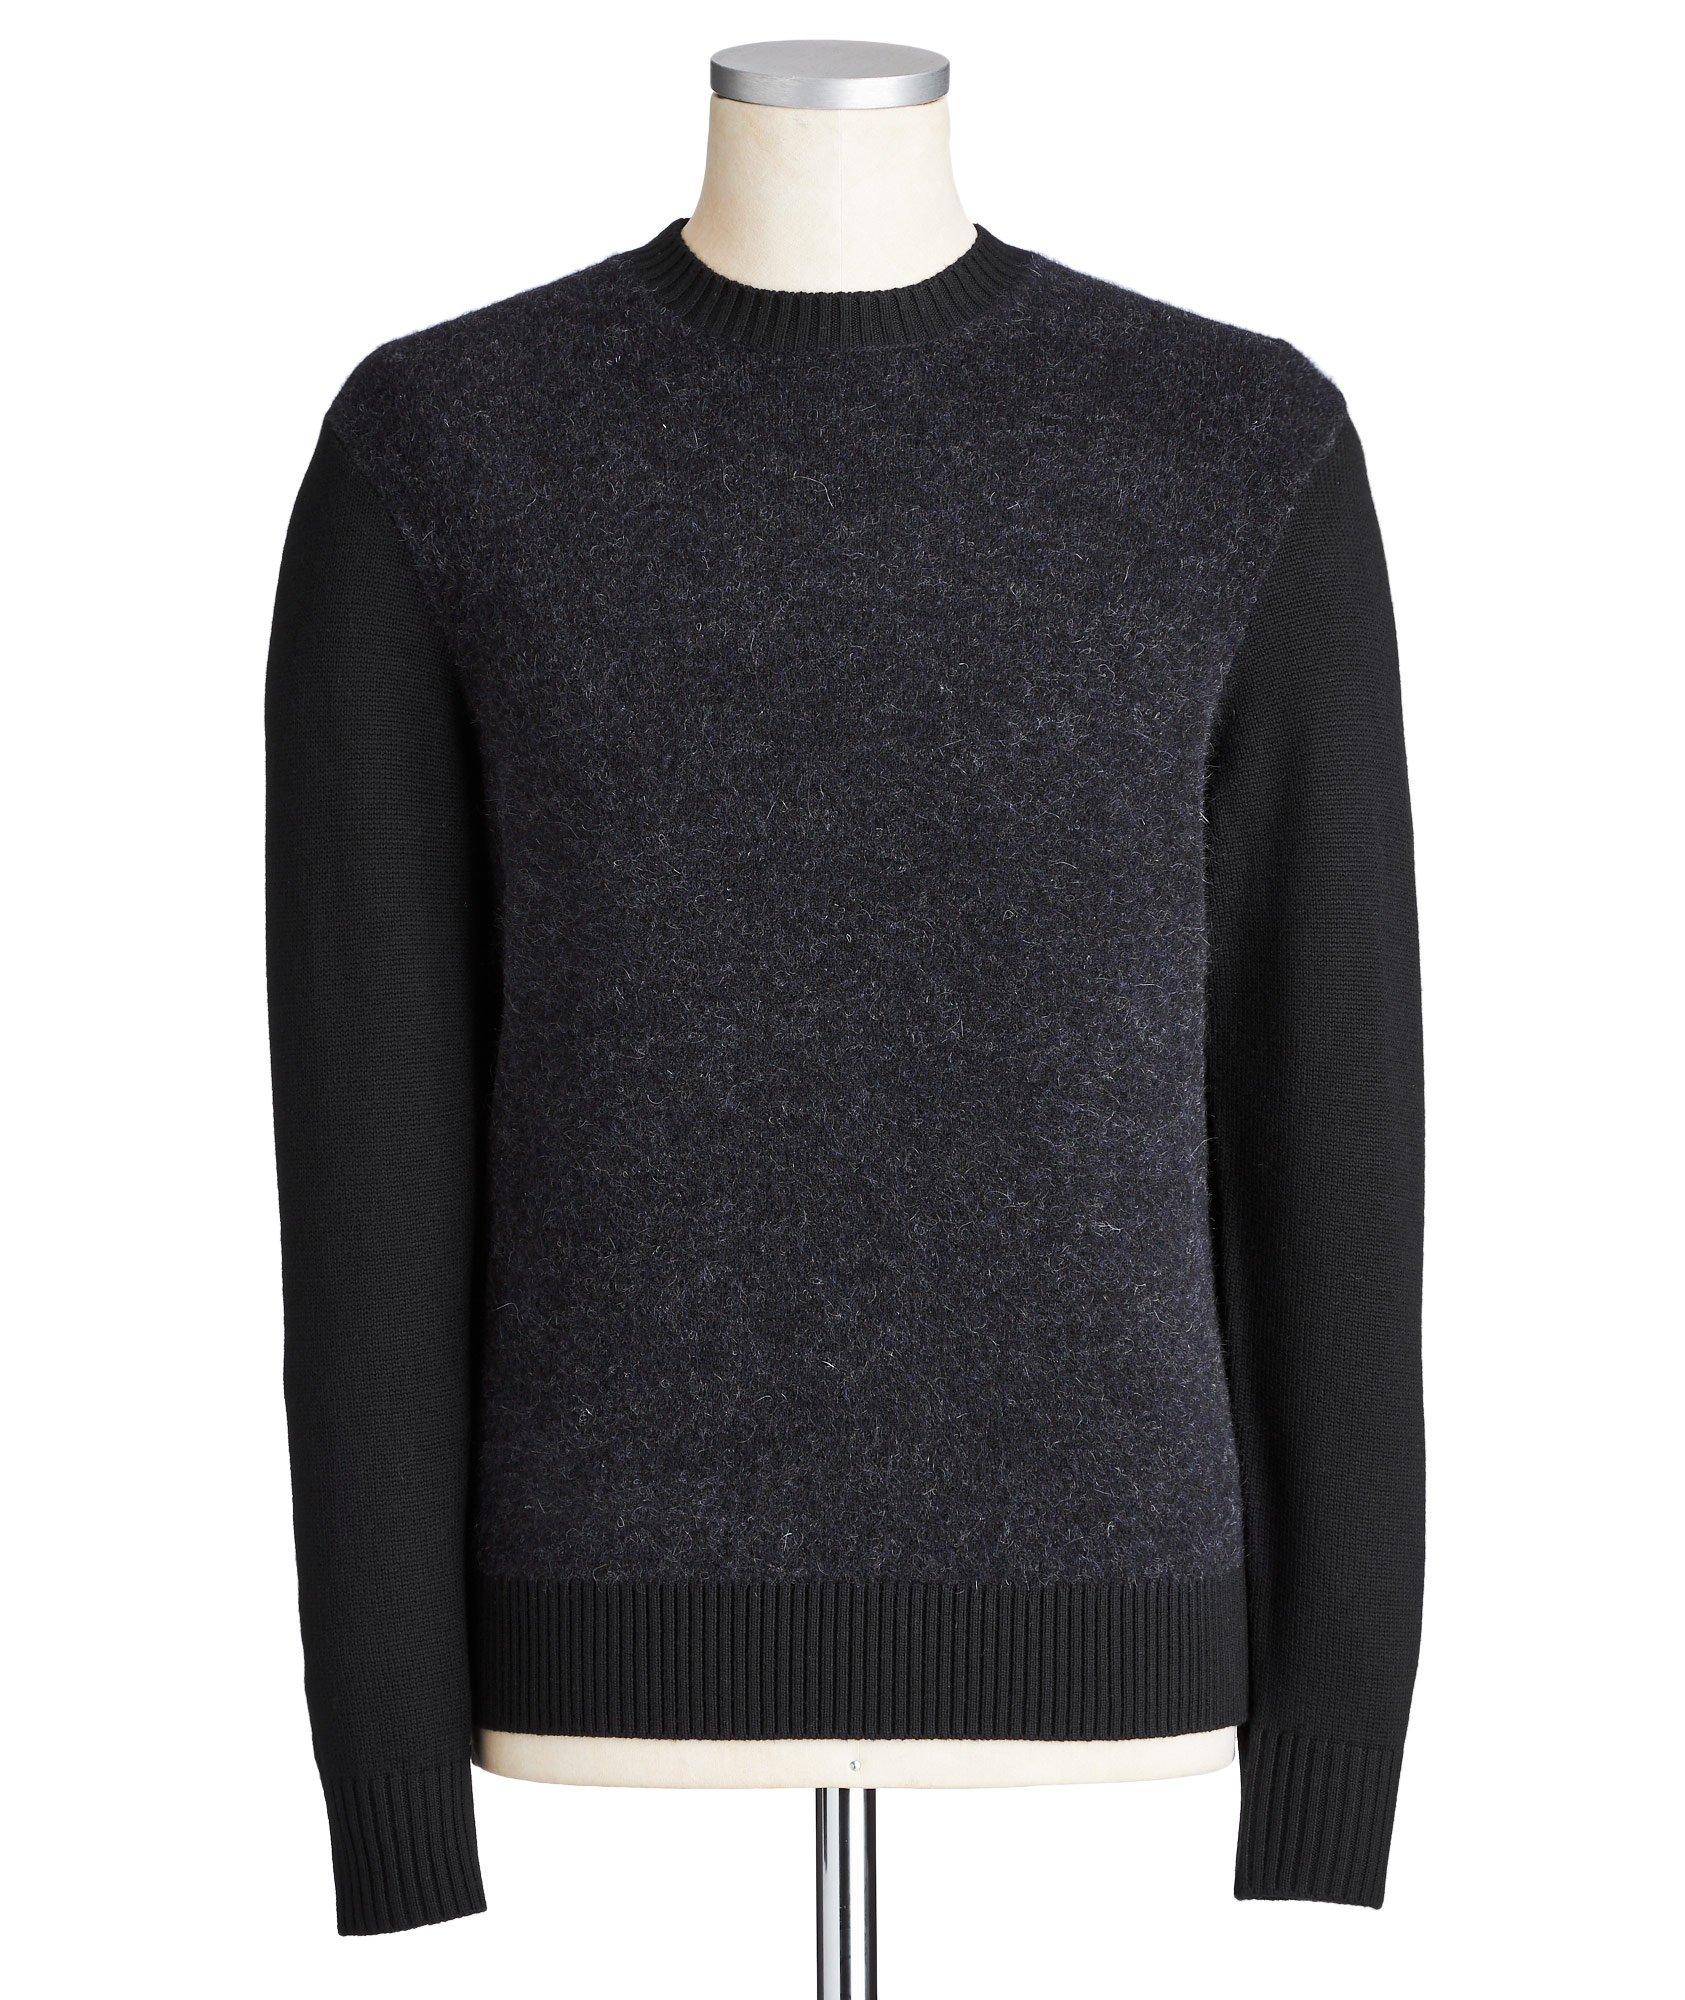 Textured Wool-Blend Sweater image 0